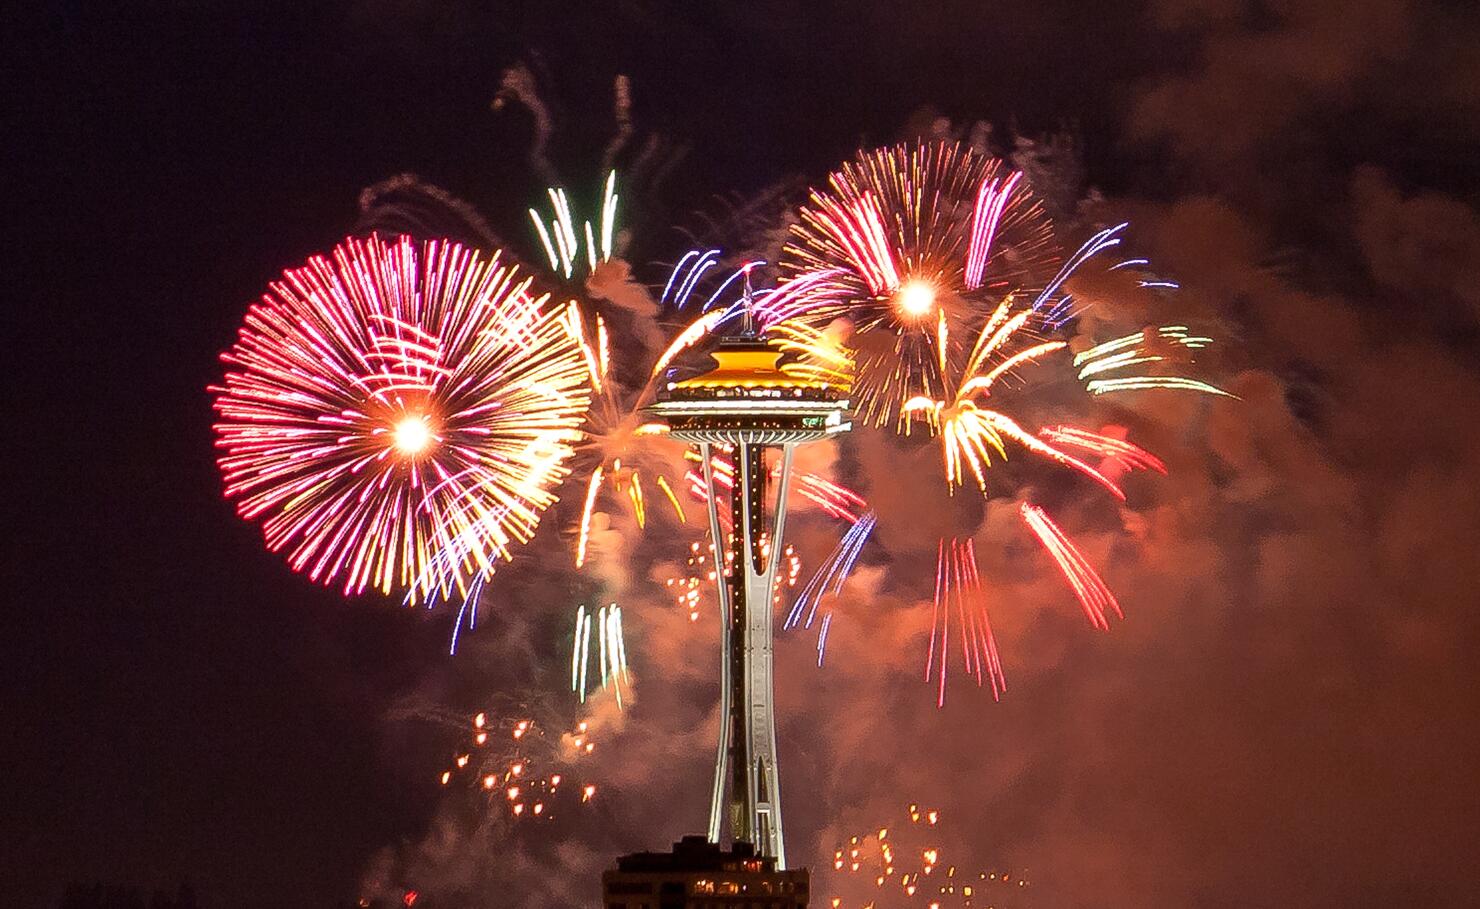 Space Needle Fireworks Show Is Going Virtual For New Years | iHeartRadio